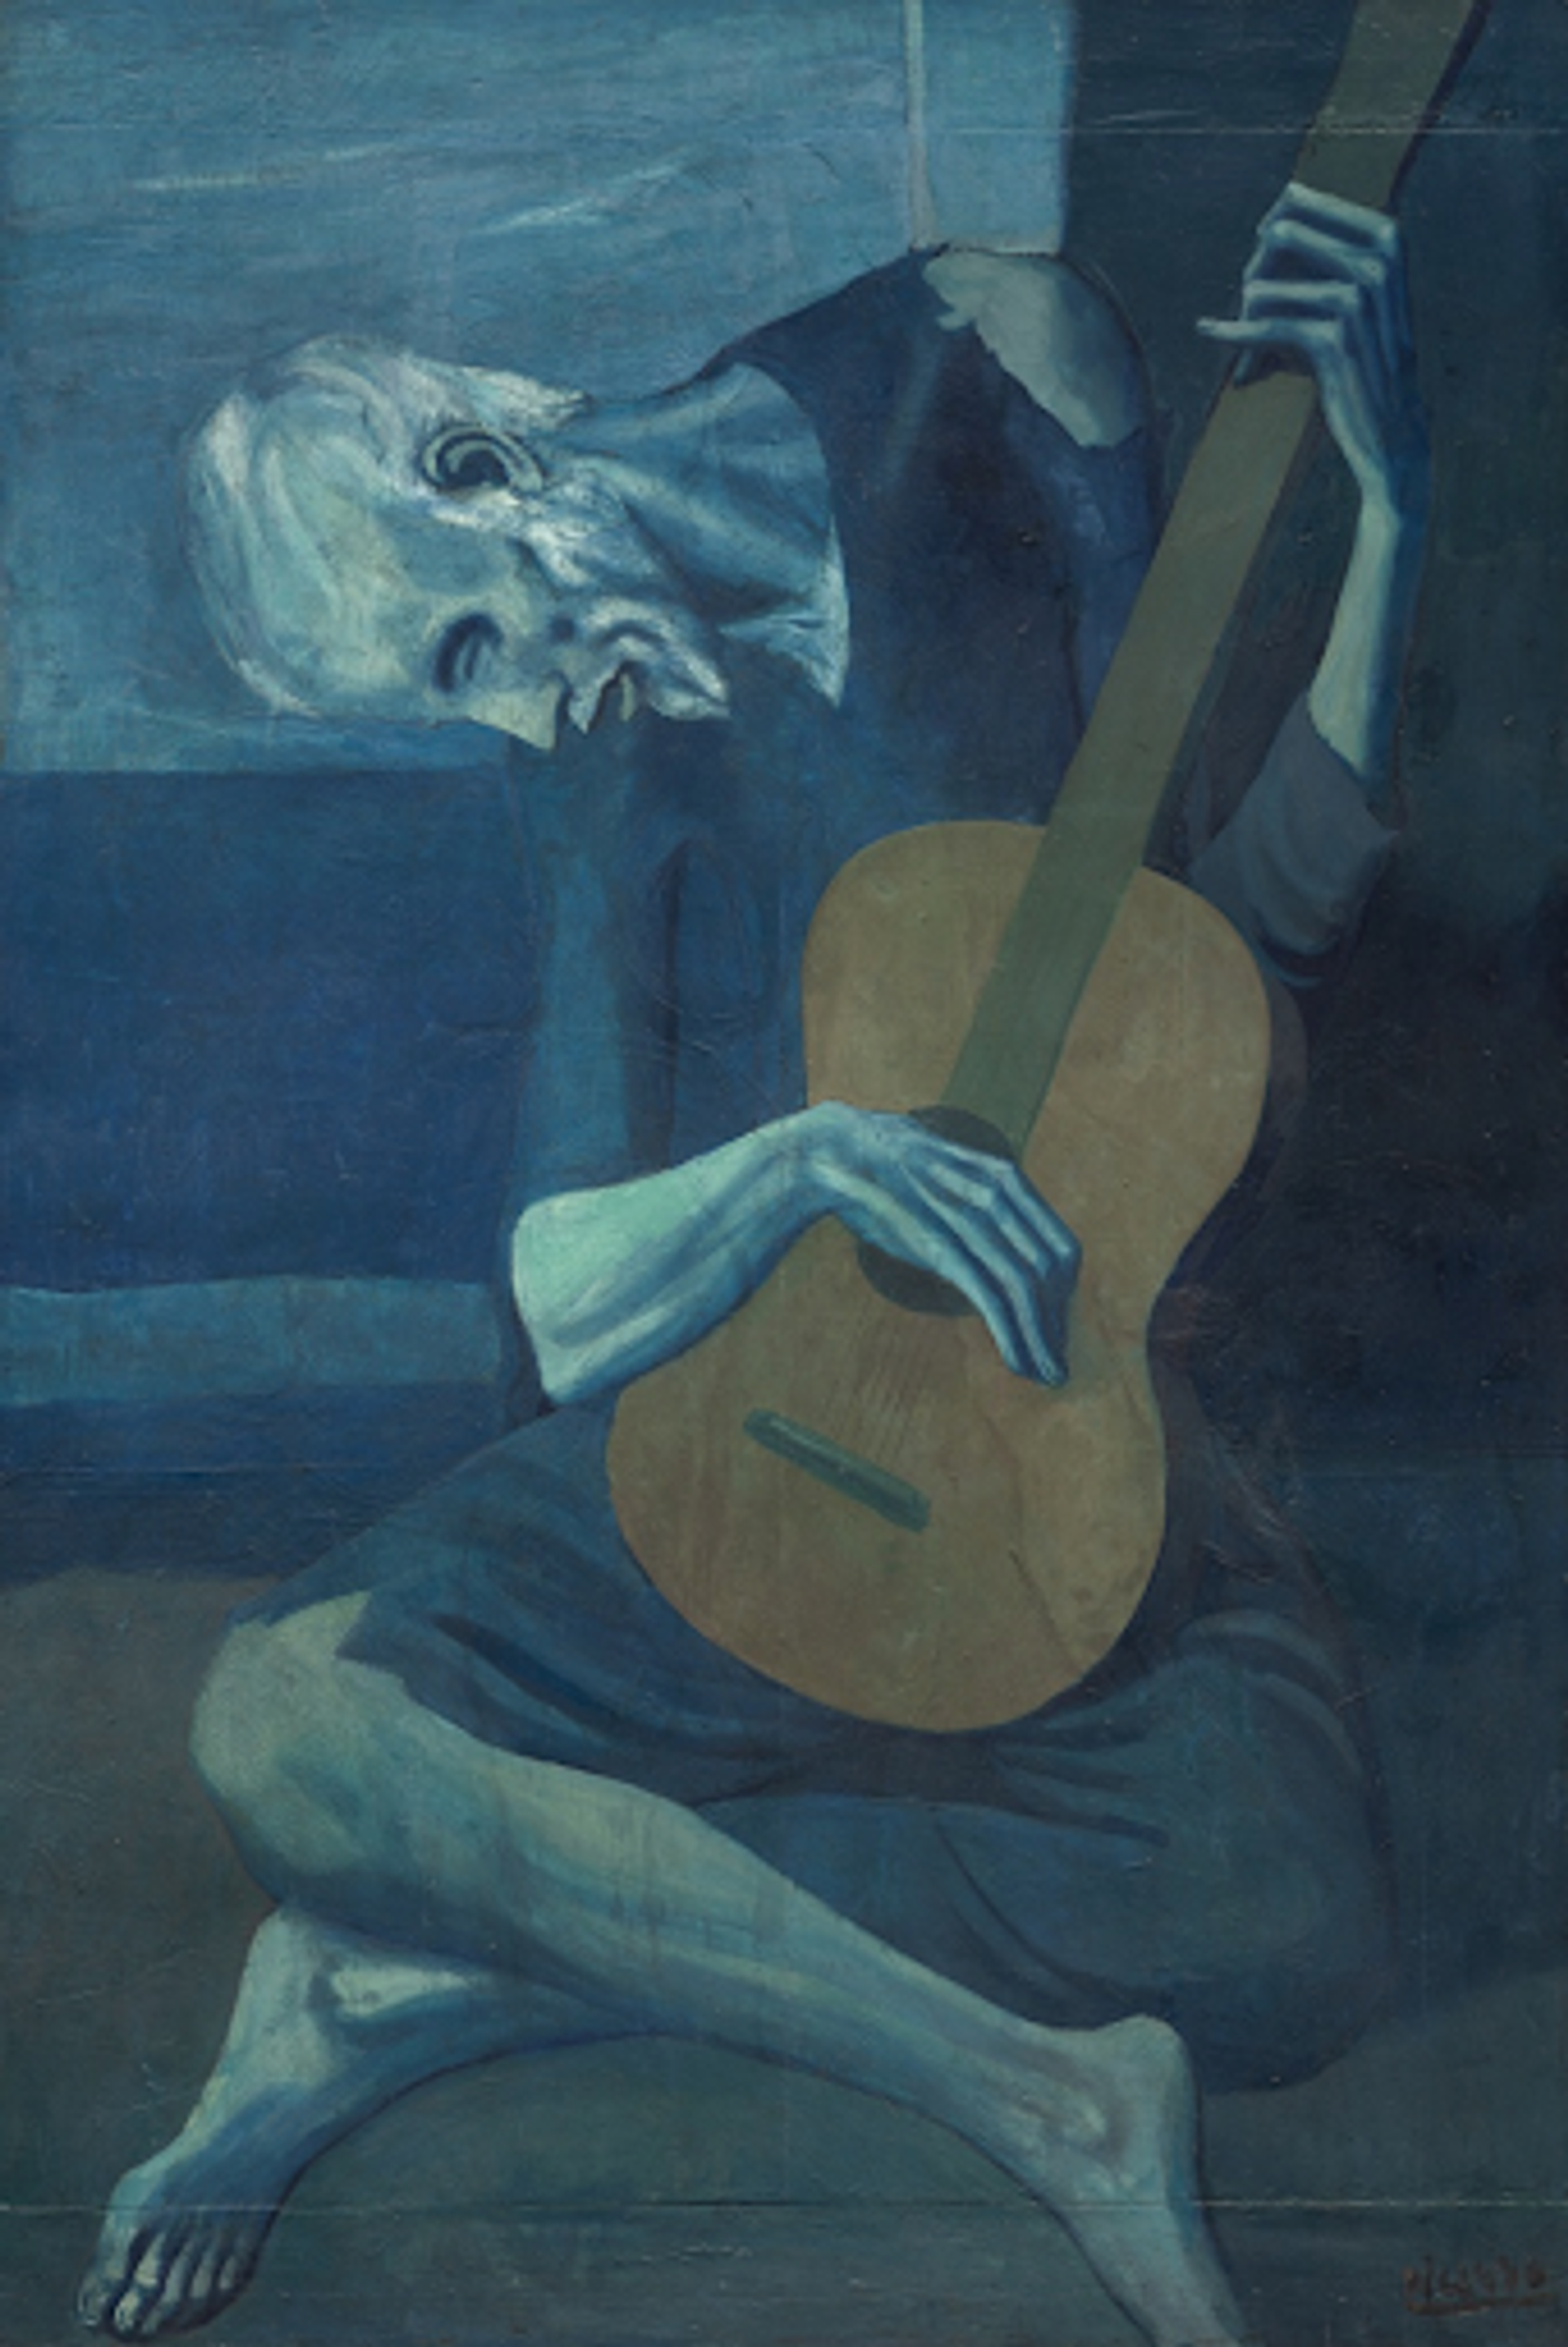 Pablo Picasso's The Old Guitarist. A Blue Period painting of an unclothed couple on the left and a woman holding a baby on the right with two artworks in the background. 